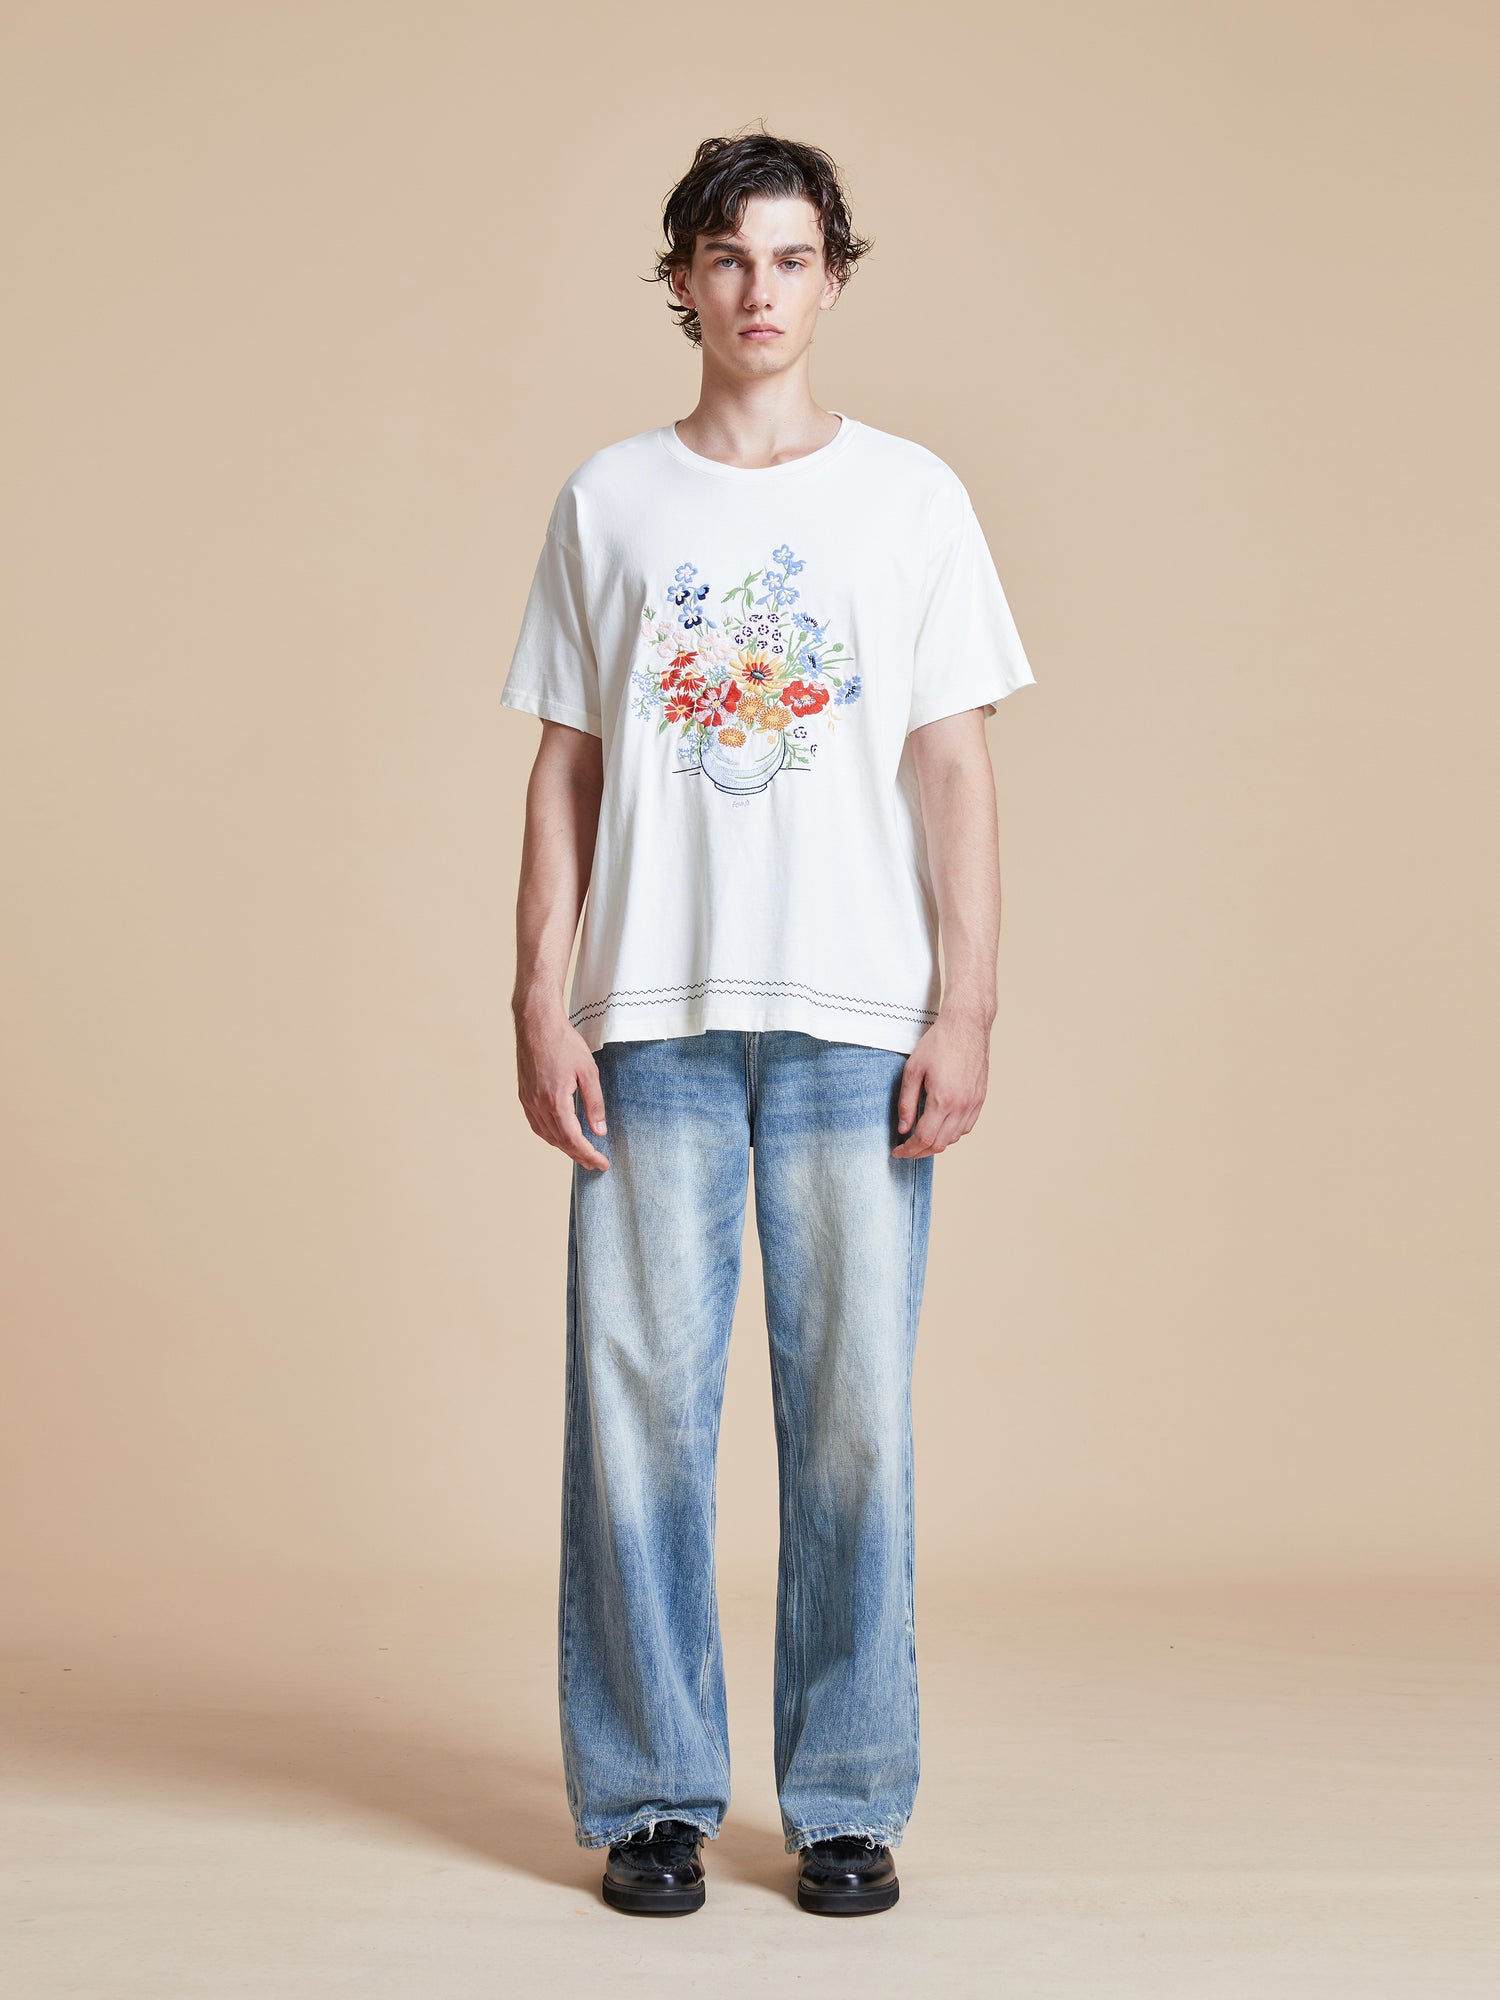 A man wearing a Bouquet Flowers Tee from Found and blue jeans.